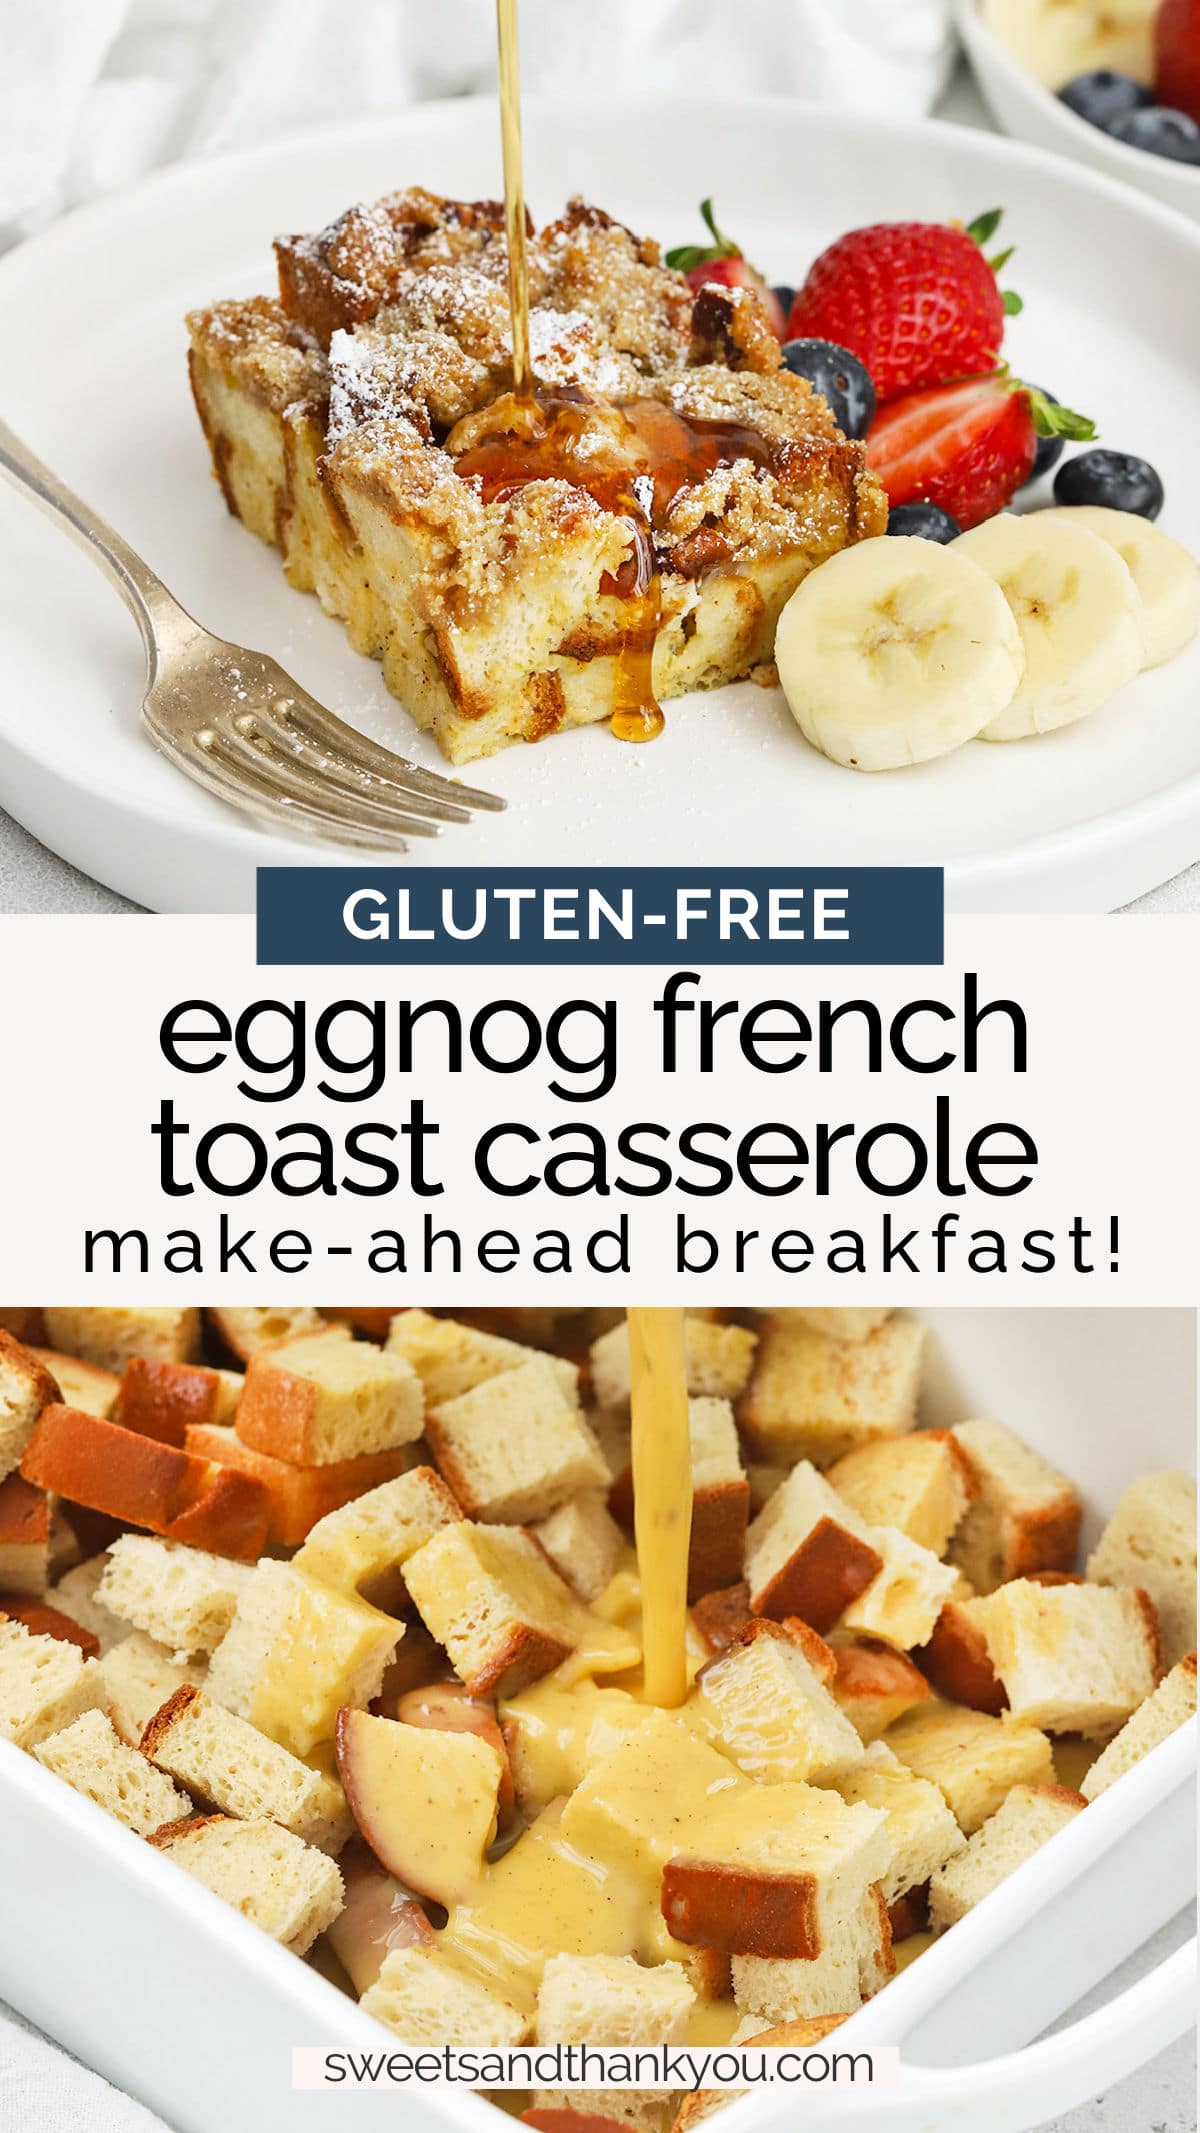 Gluten-Free Eggnog French Toast Casserole - This eggnog baked french toast is a delightful make-ahead holiday breakfast. We love the warm spices & how easy it is to make! // gluten free baked French toast // gluten free French toast bake // eggnog French toast baker // eggnog French toast casserole // gluten-free eggnog french toast // gluten free french toast recipe // gluten-free eggnog bread pudding